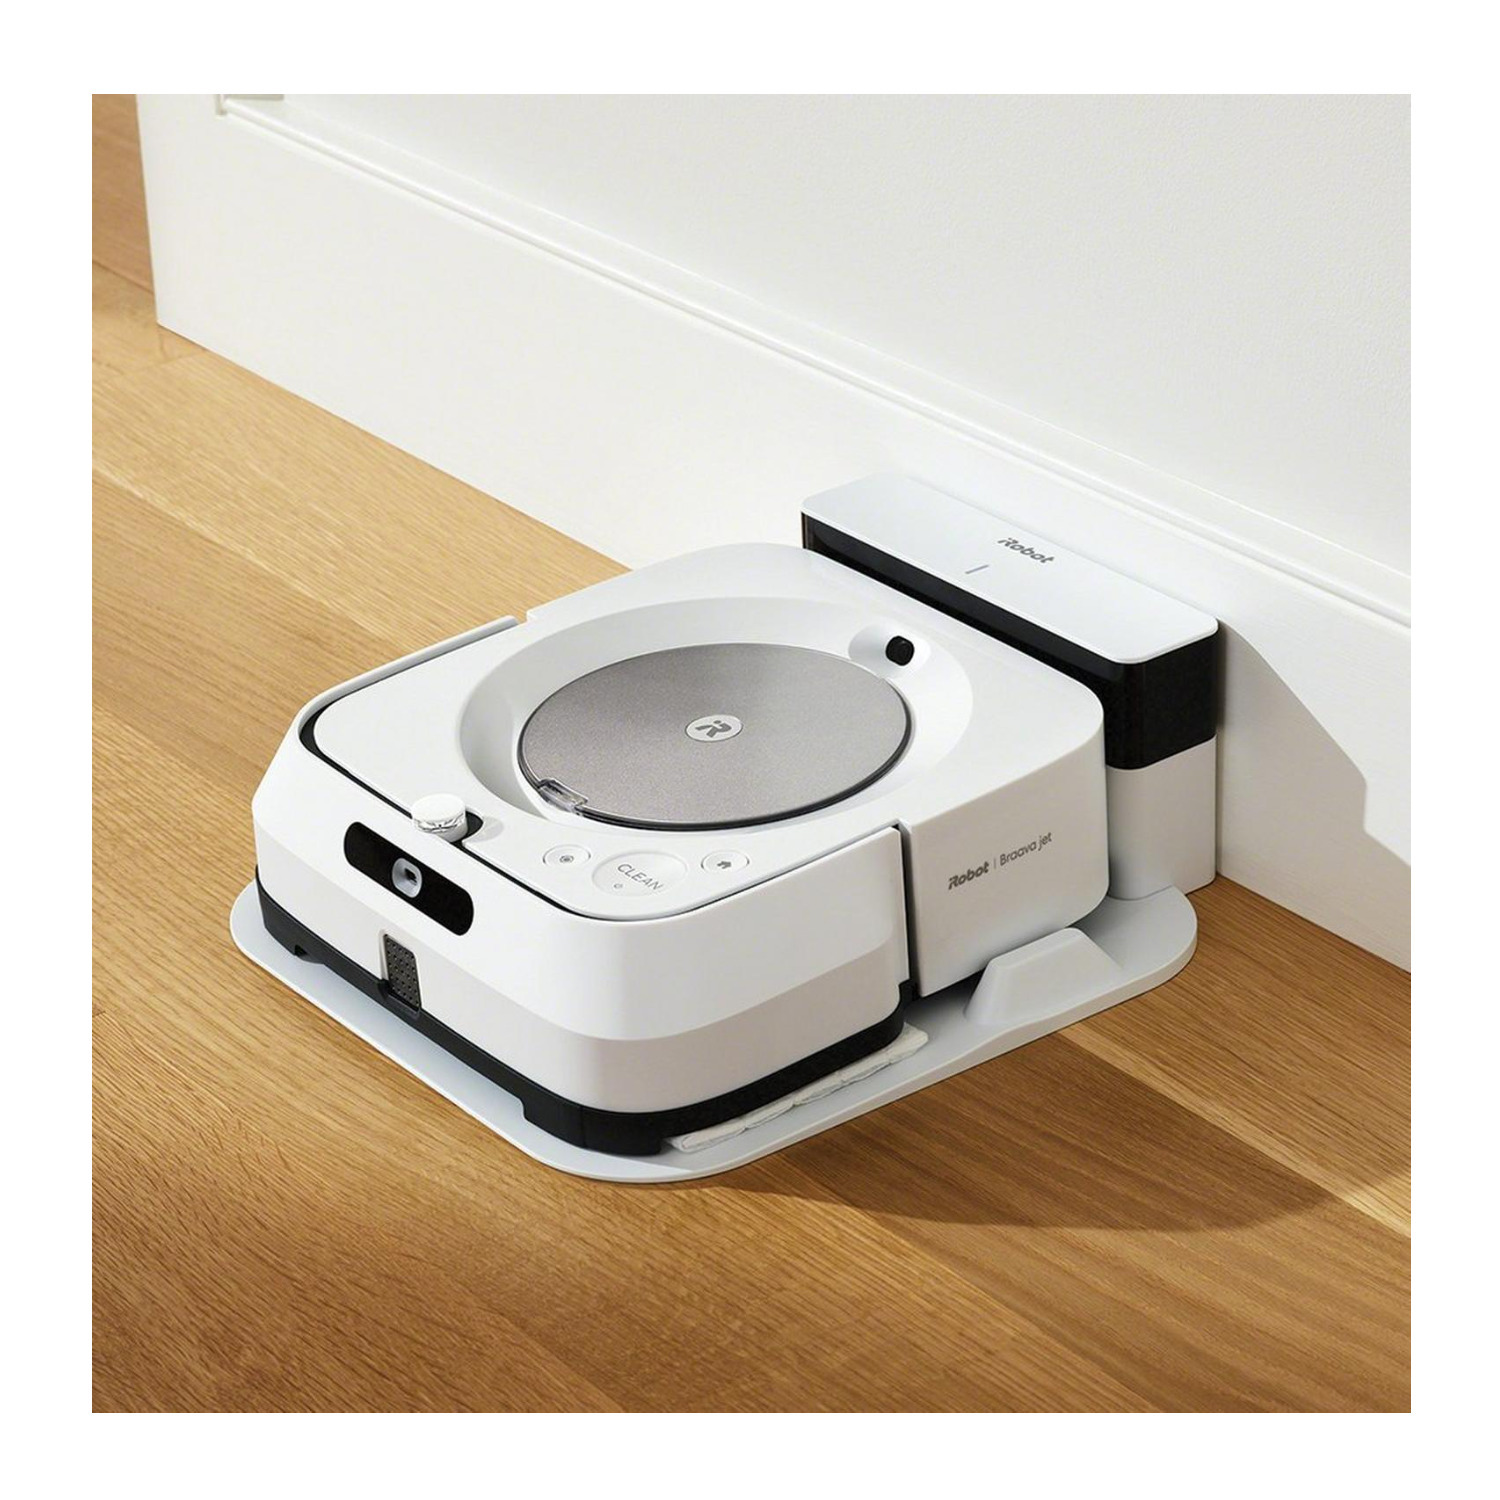 iRobot Roomba i3+ Wi-Fi Connected Robot Vacuum with Braava Jet m6 Robot Mop - image 10 of 13